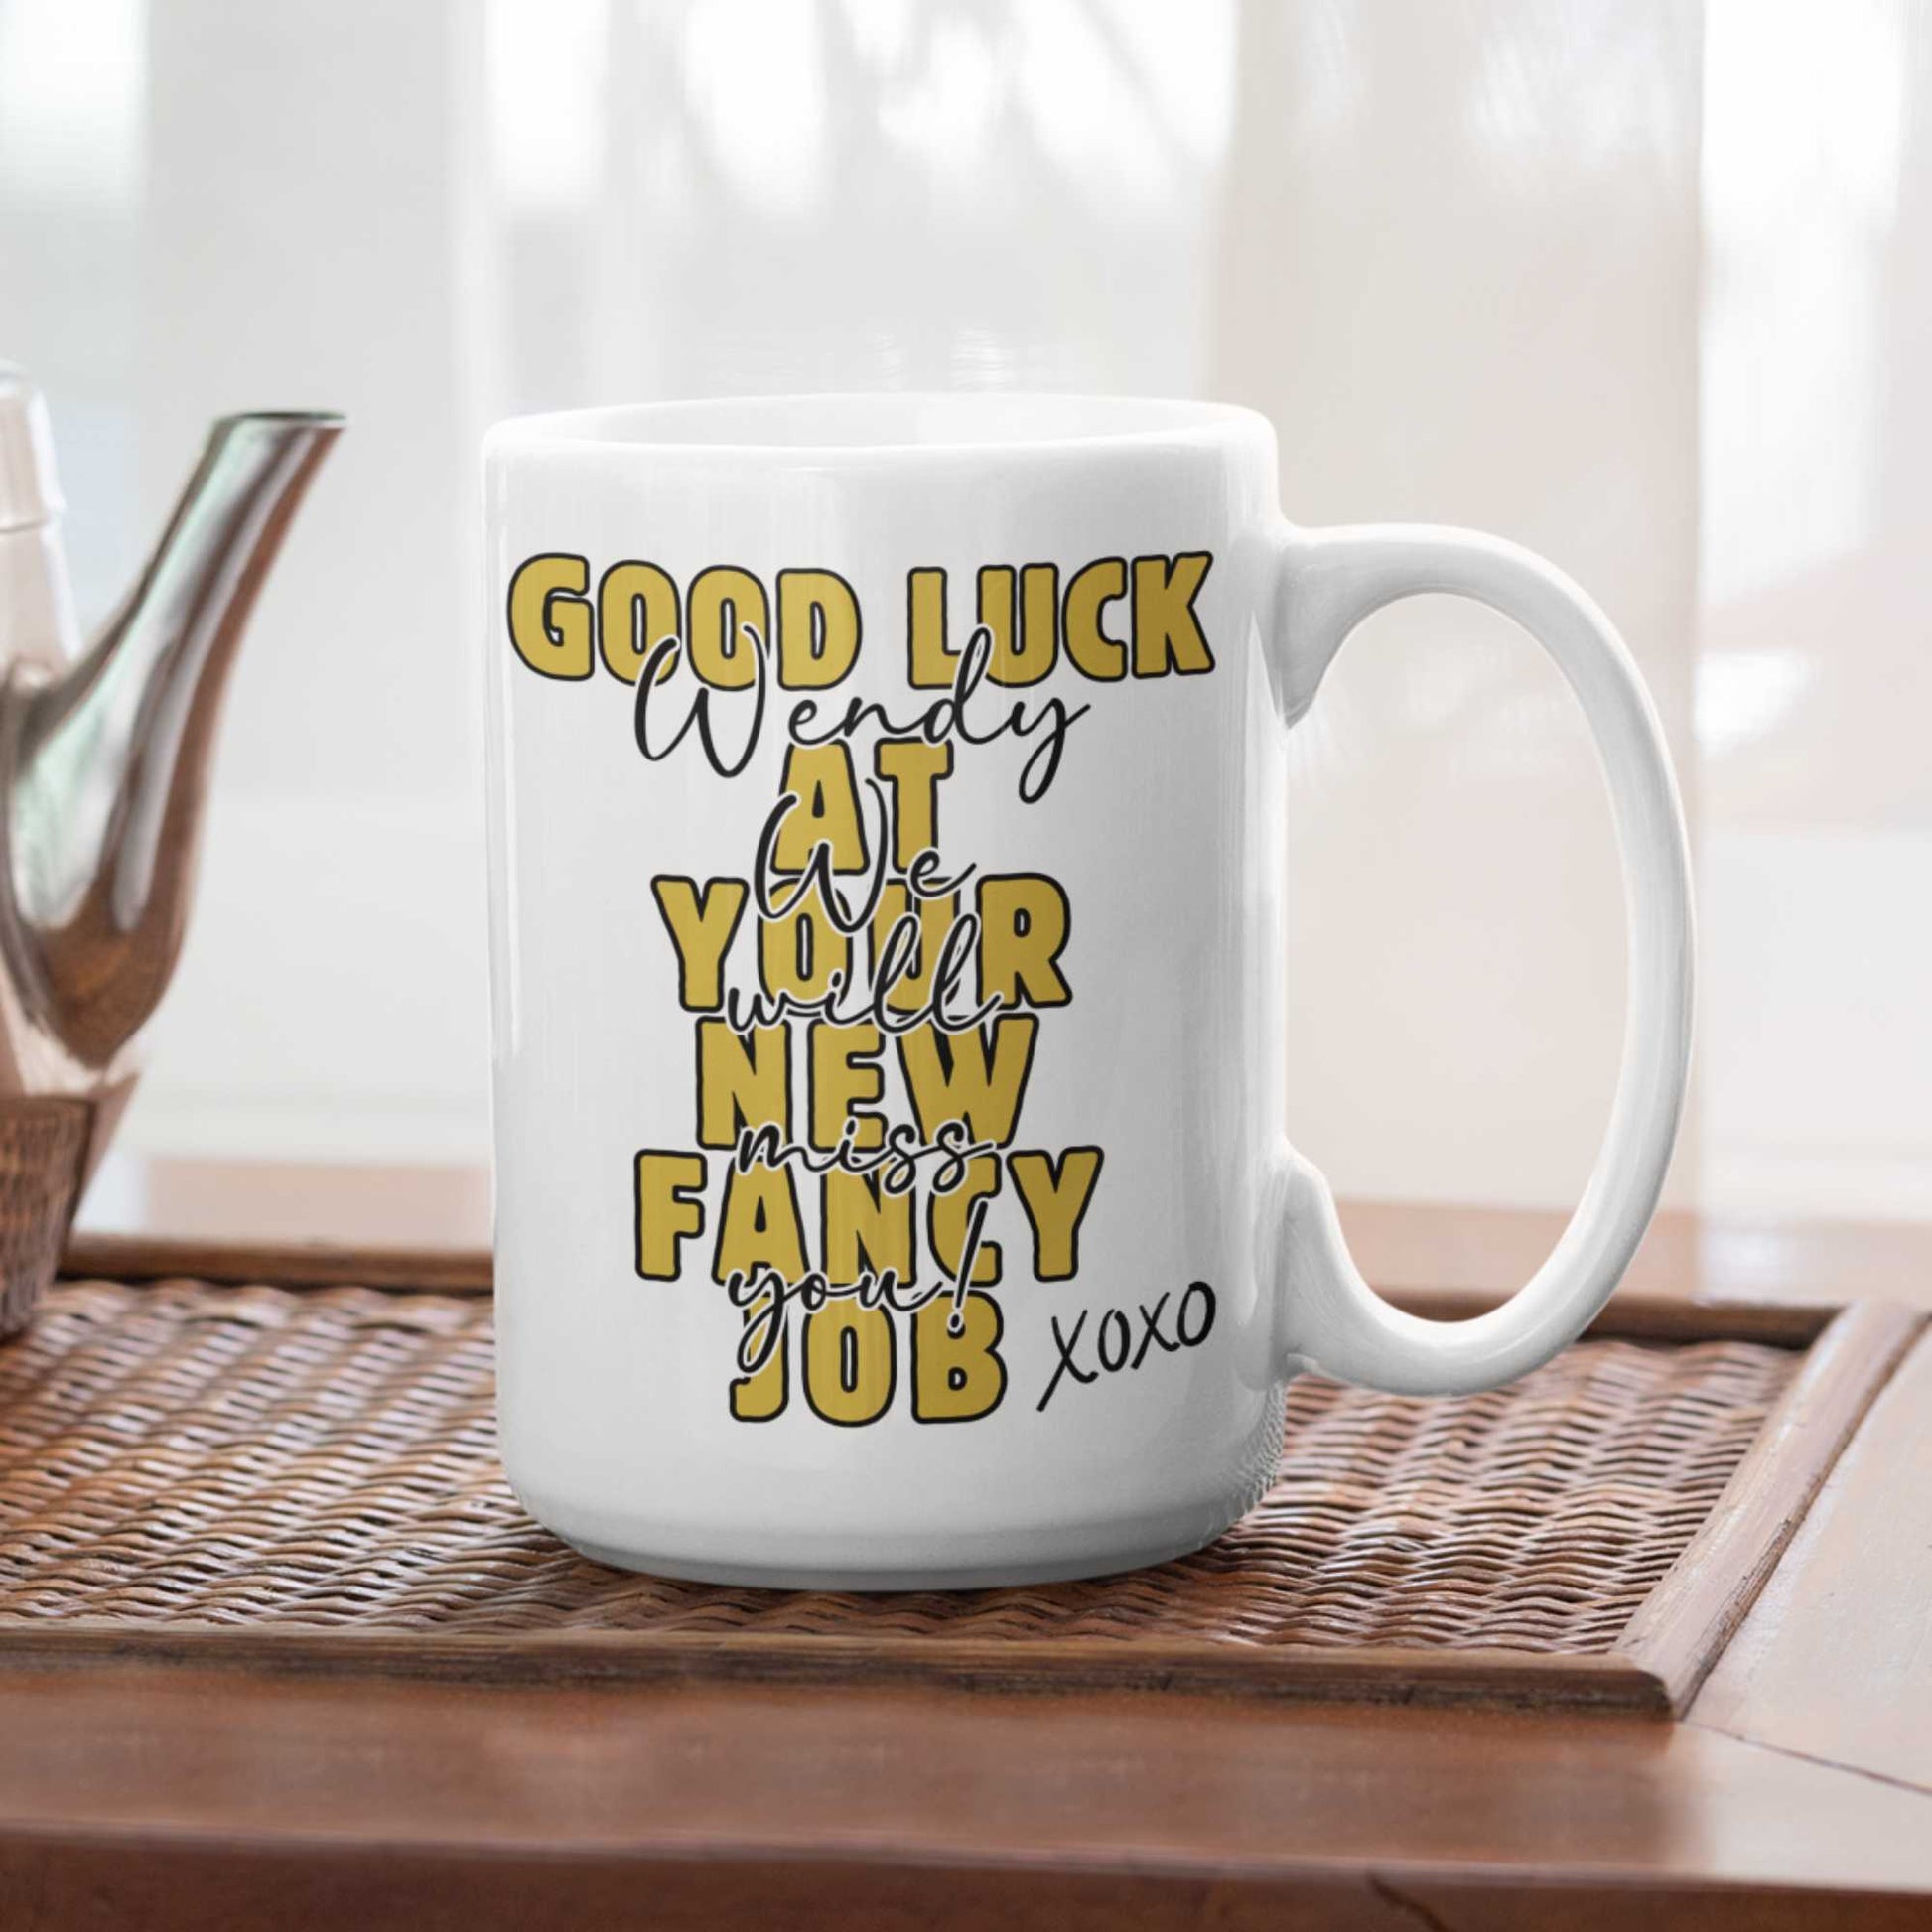 good luck at new job co-worker colleague leaving gift personalised coffee mug white 15 oz bigger mugs for leaving work bestie leaving present